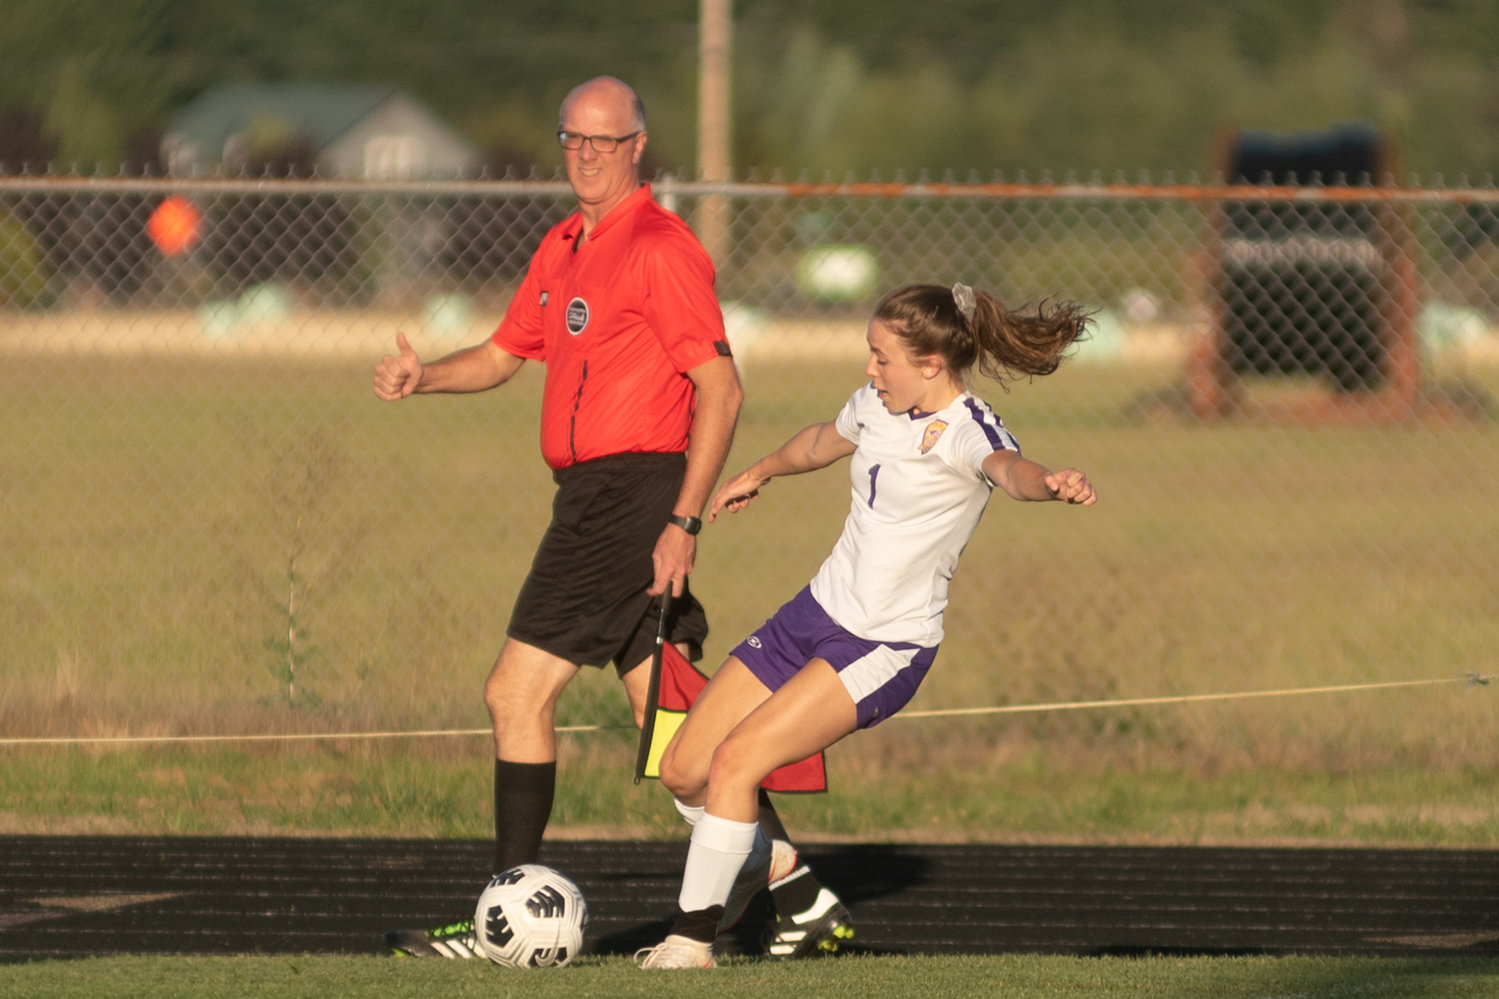 Onalaska senior Cierra Russ fires a shot at goal in the Loggers 2-1 win over Adna Monday afternoon.